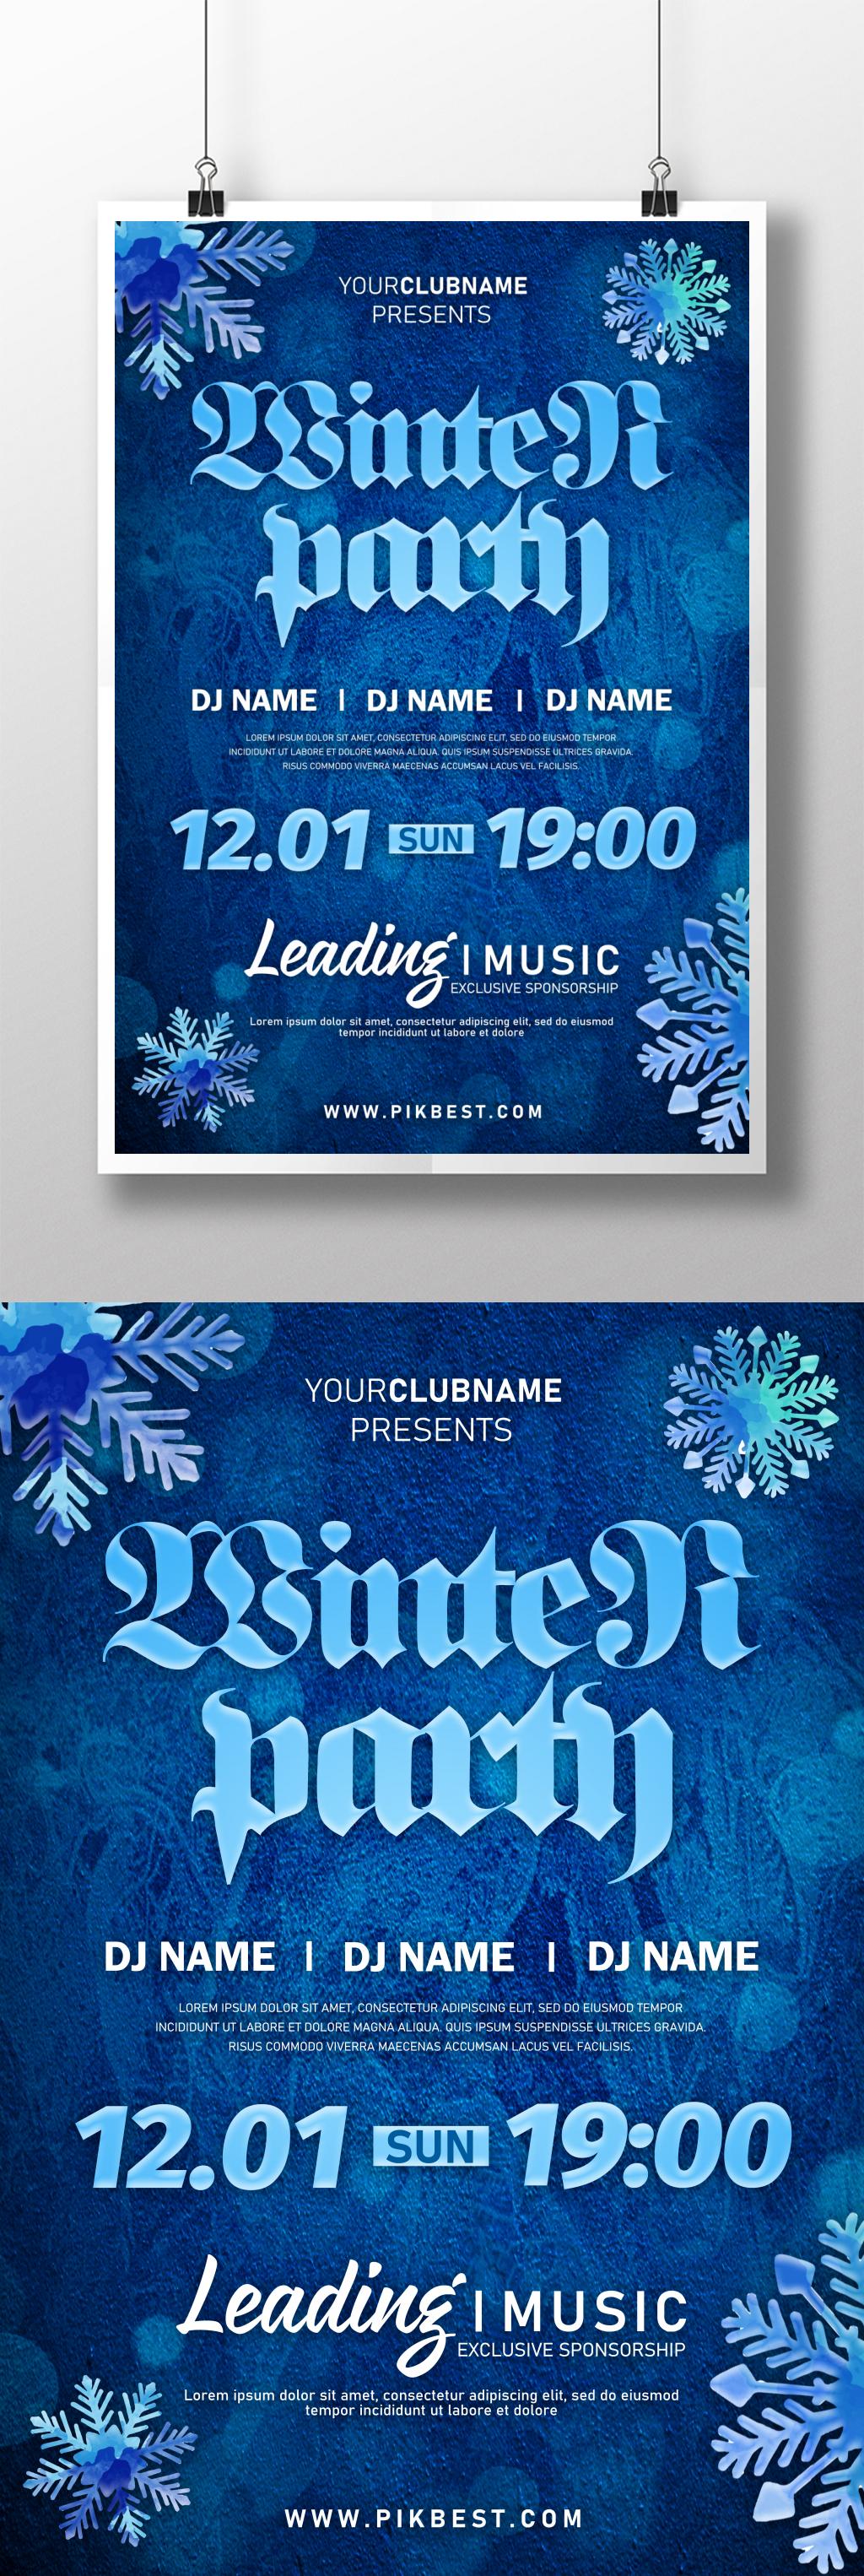 winter-club-party-poster-template-image-picture-free-download-450022484